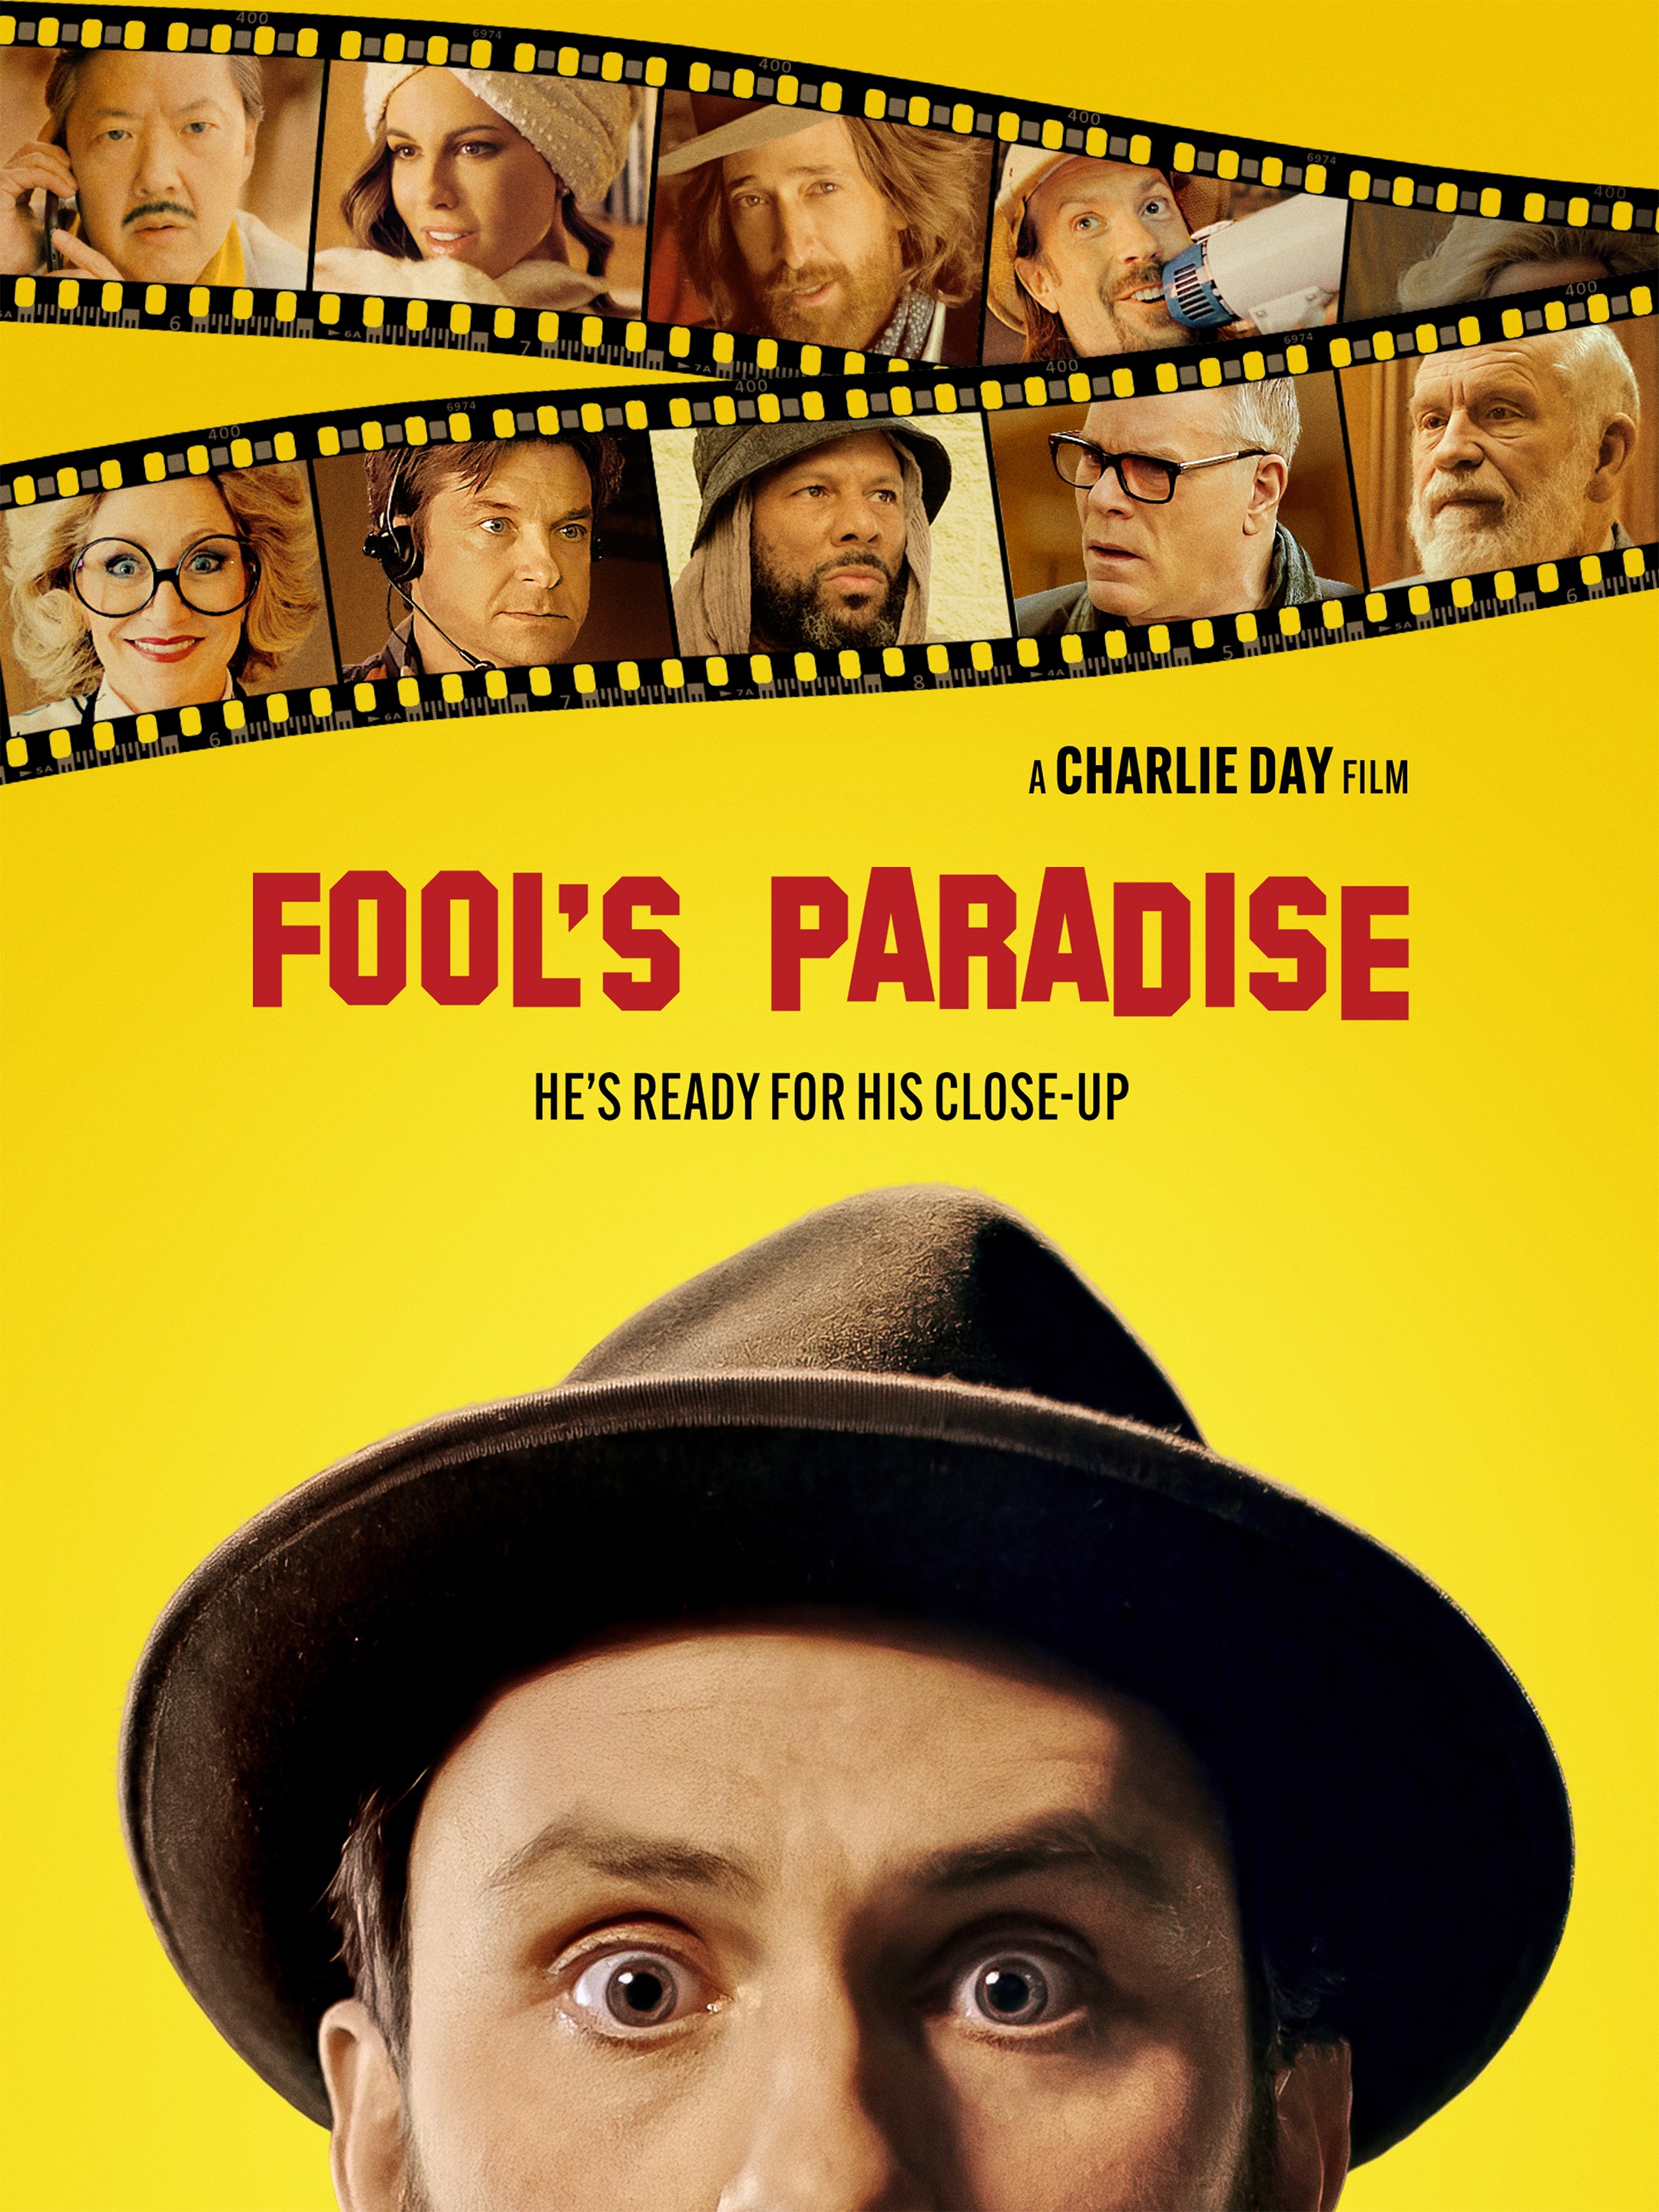 I got to attend the premiere of Charlie Days film 'Fools Paradise